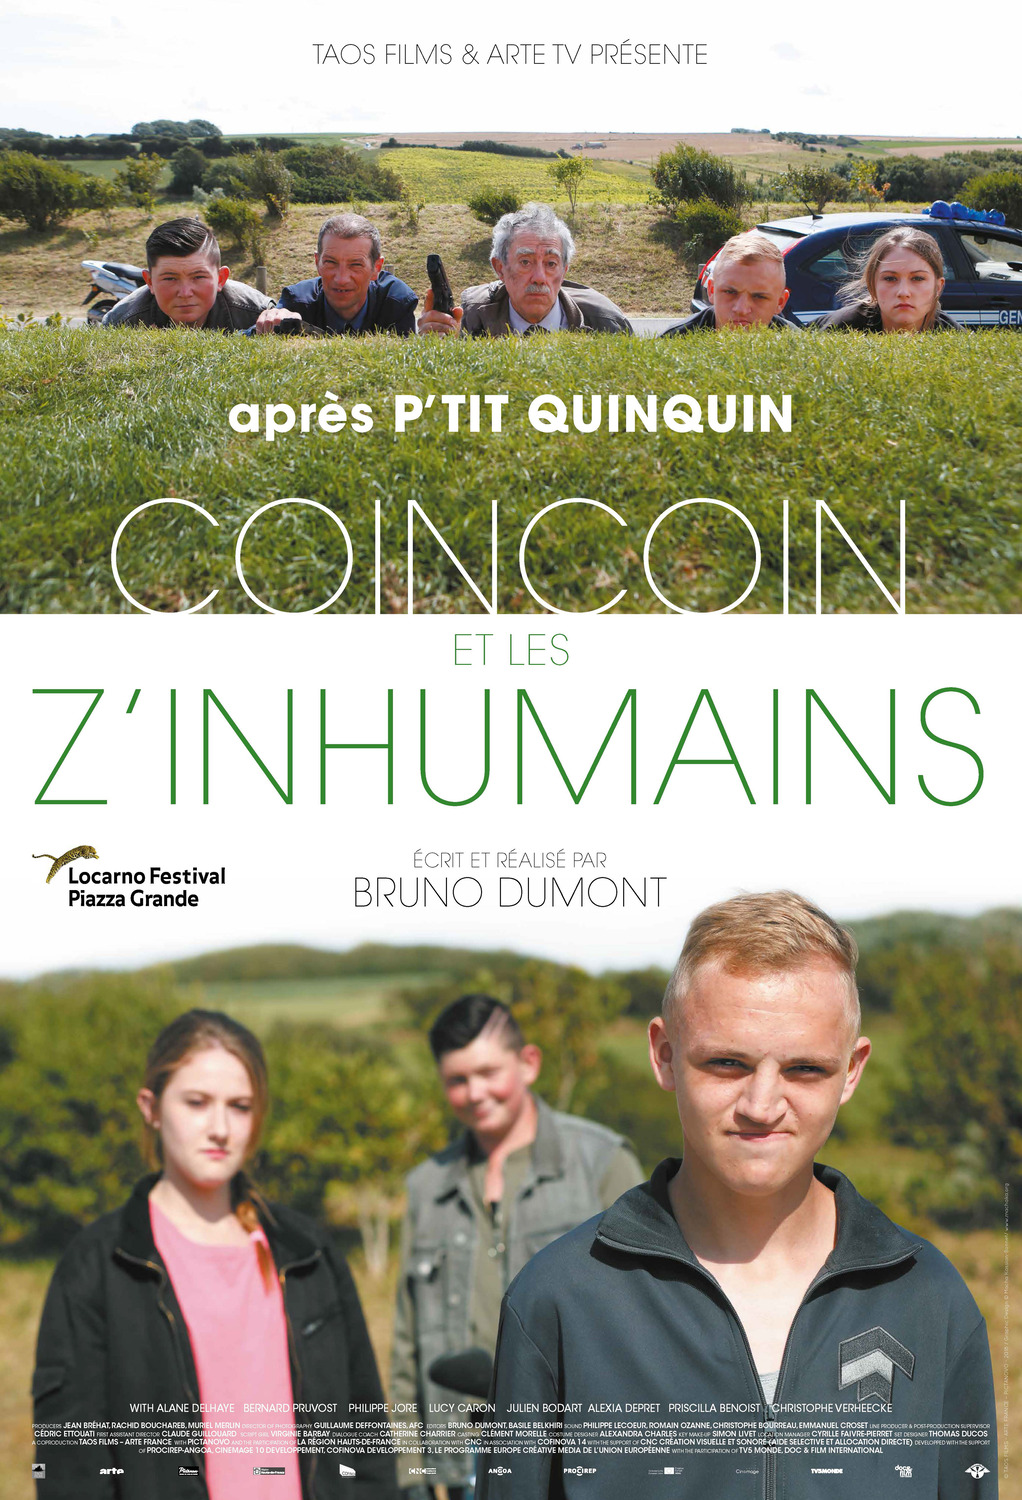 Extra Large TV Poster Image for Coincoin et les z'inhumains (#2 of 2)